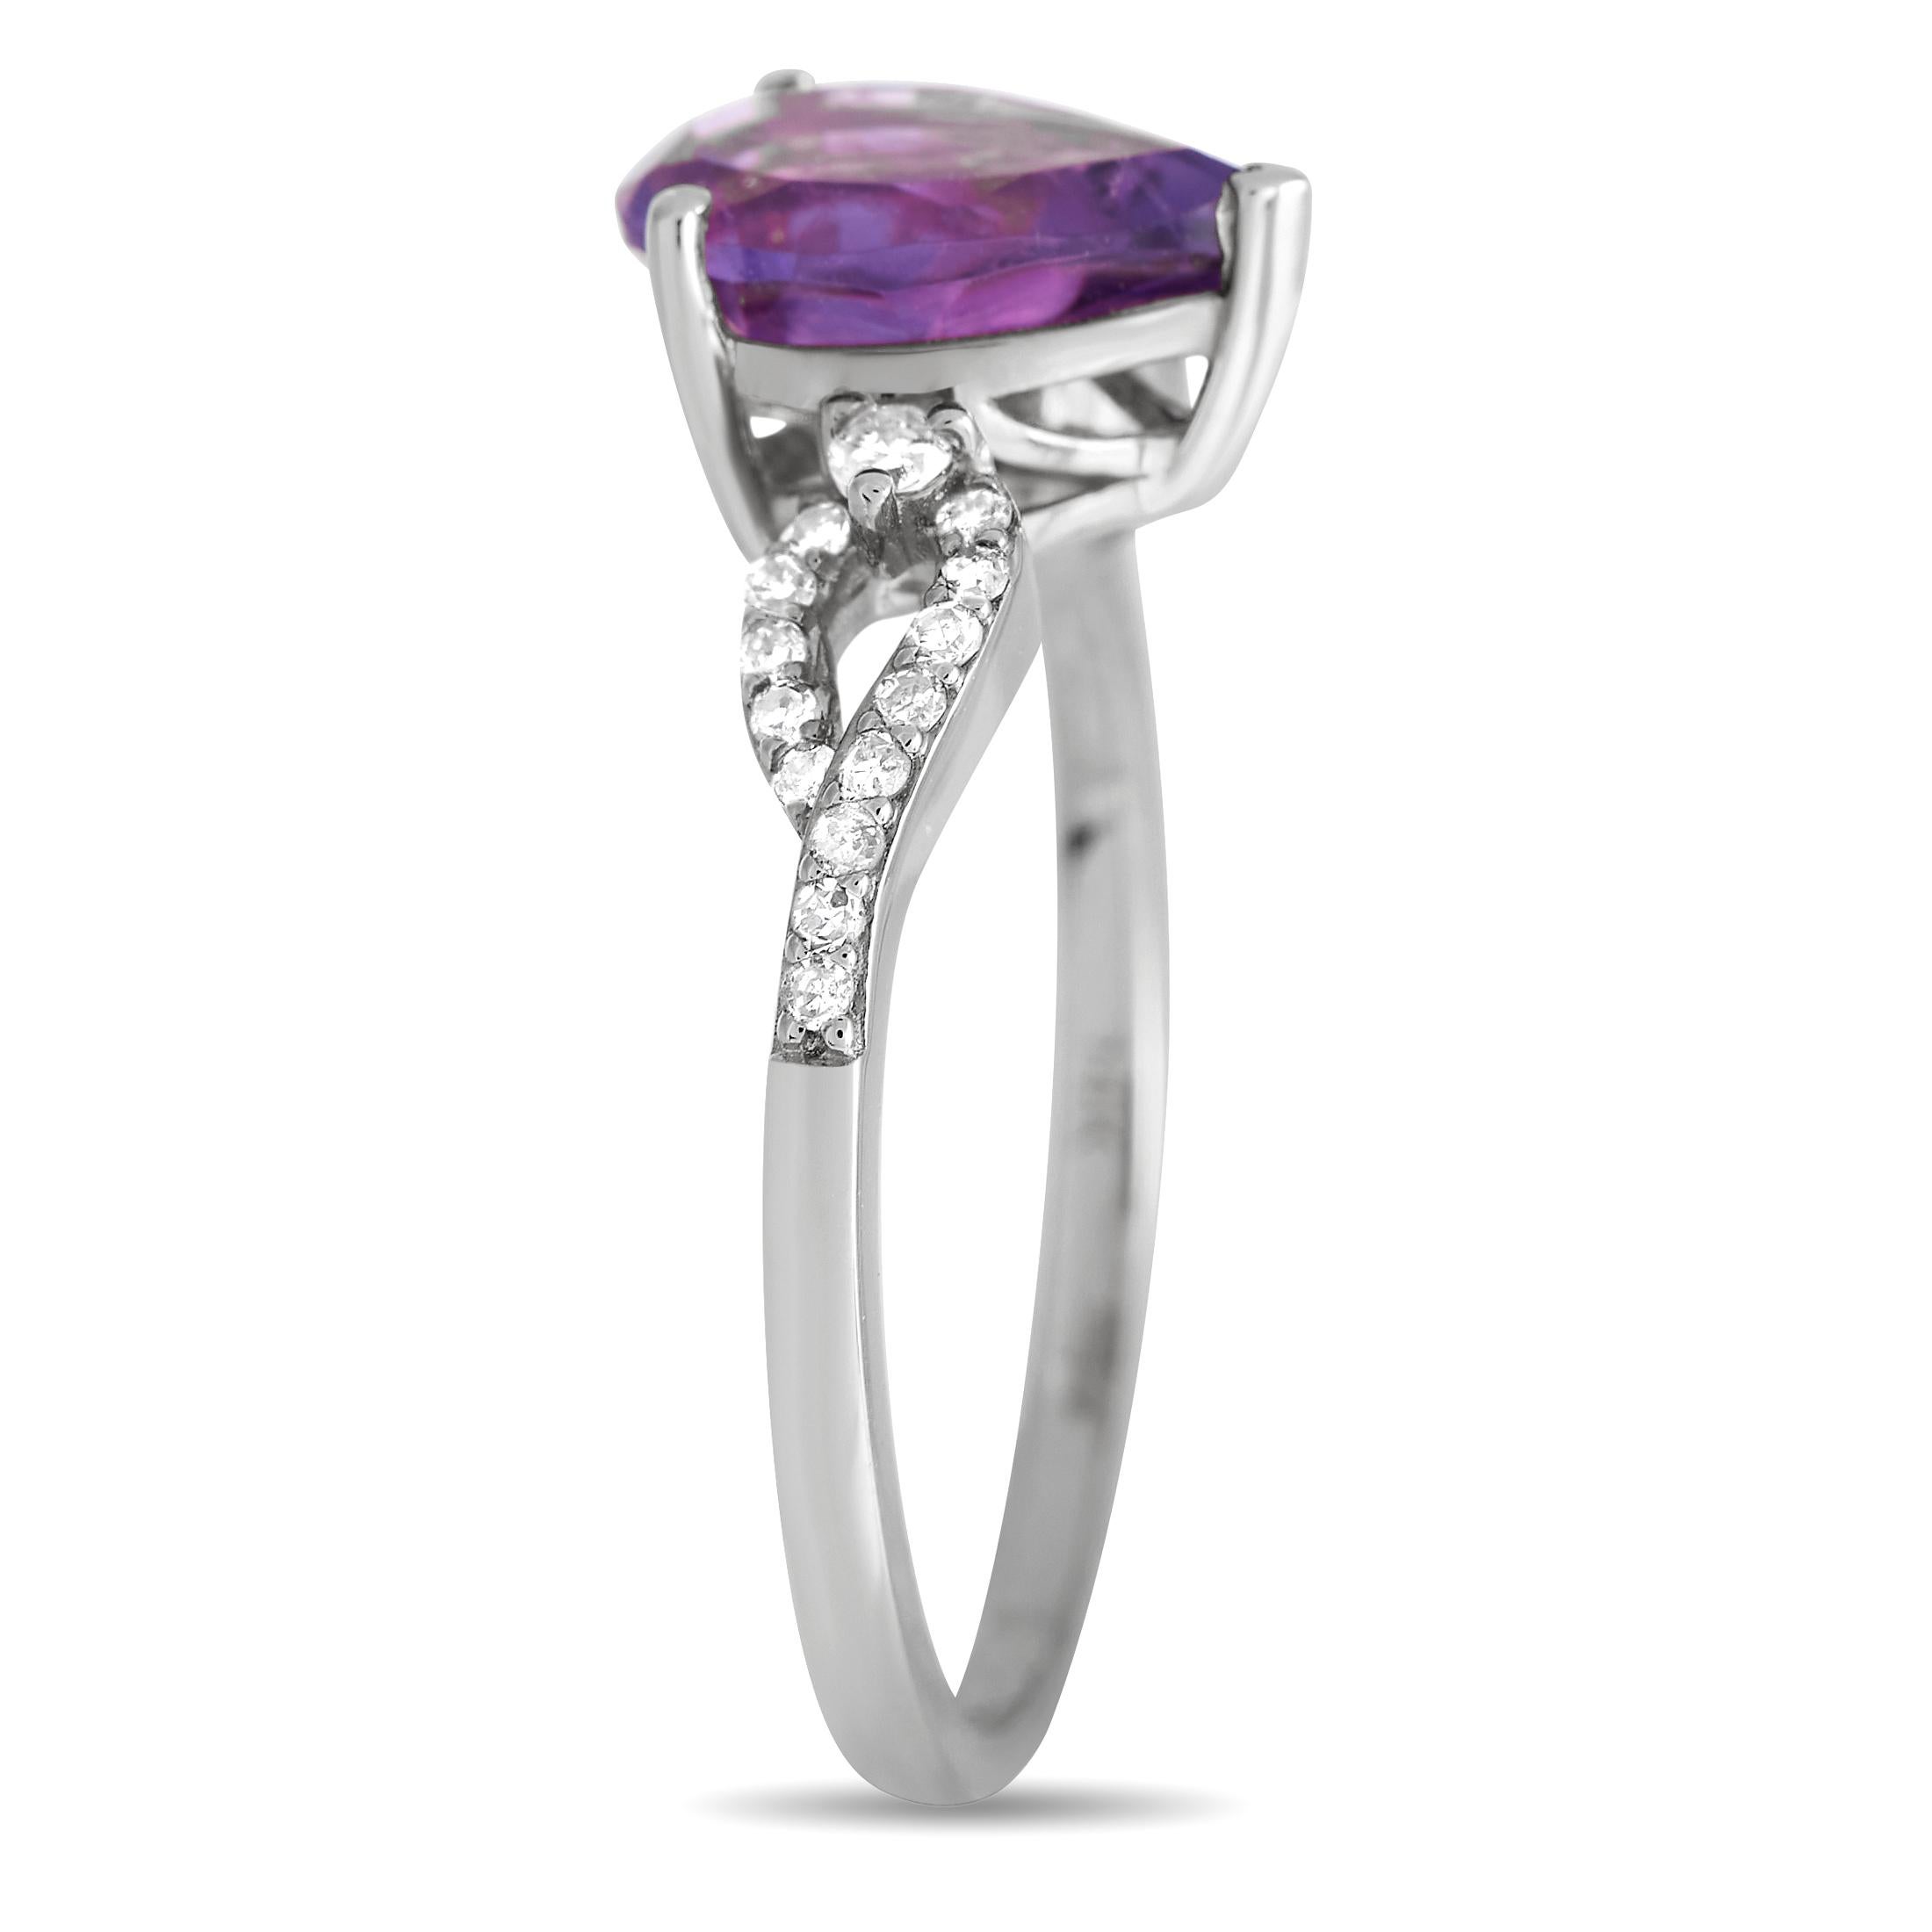 An opulent 14K white gold setting beautifully highlights a stunning amethyst center stone and diamond accents totaling 0.15 carats on this exquisite ring. Simple and stylish, this piece features a 2mm wide band and a top height measuring 6mm.This